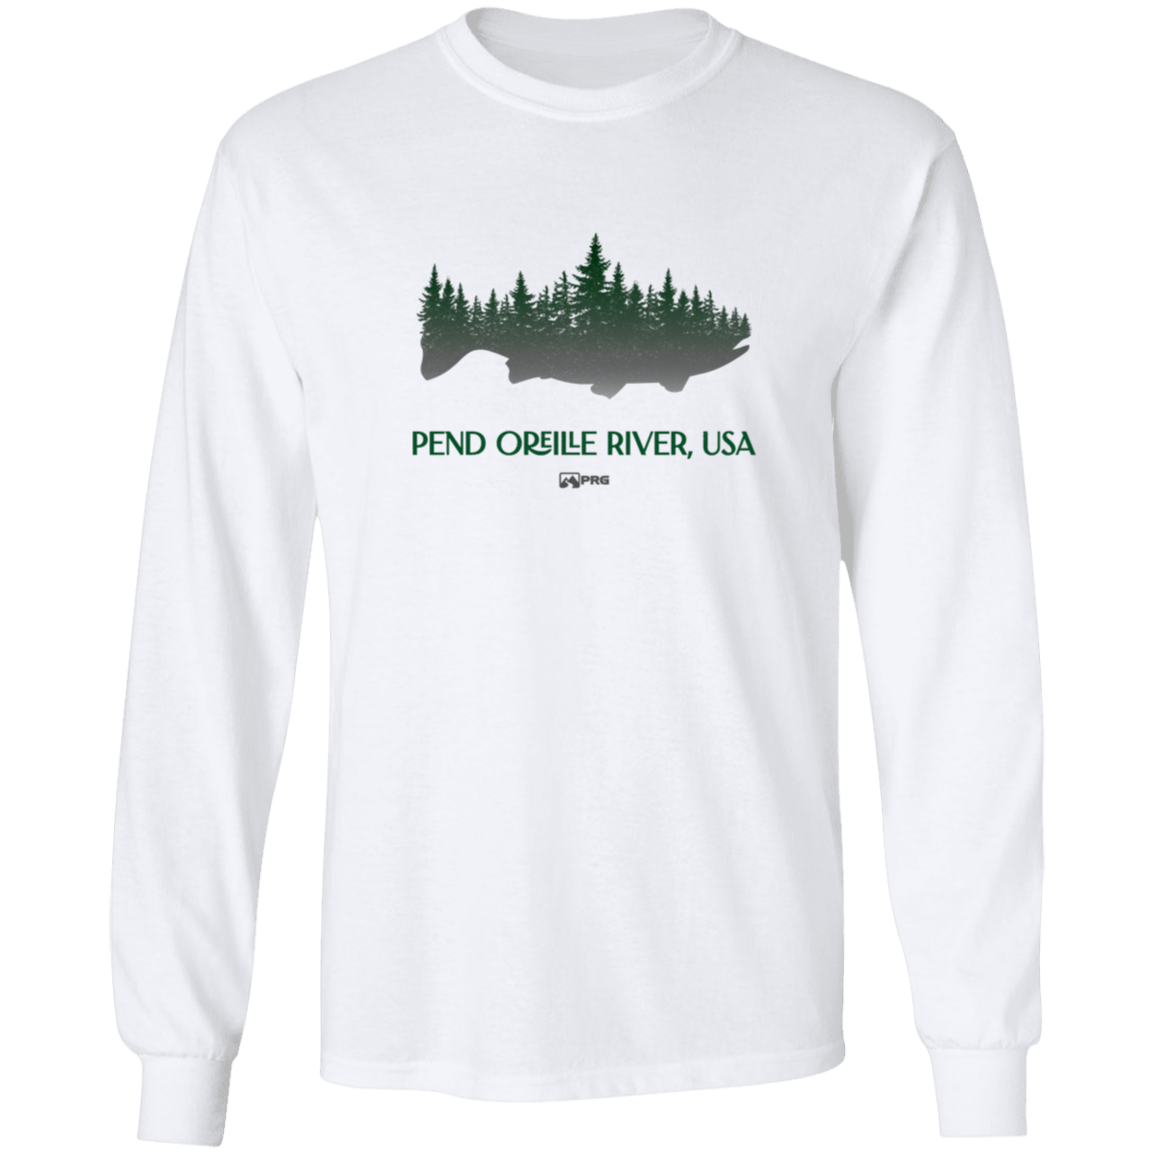 Forests & Fish - Long Sleeve